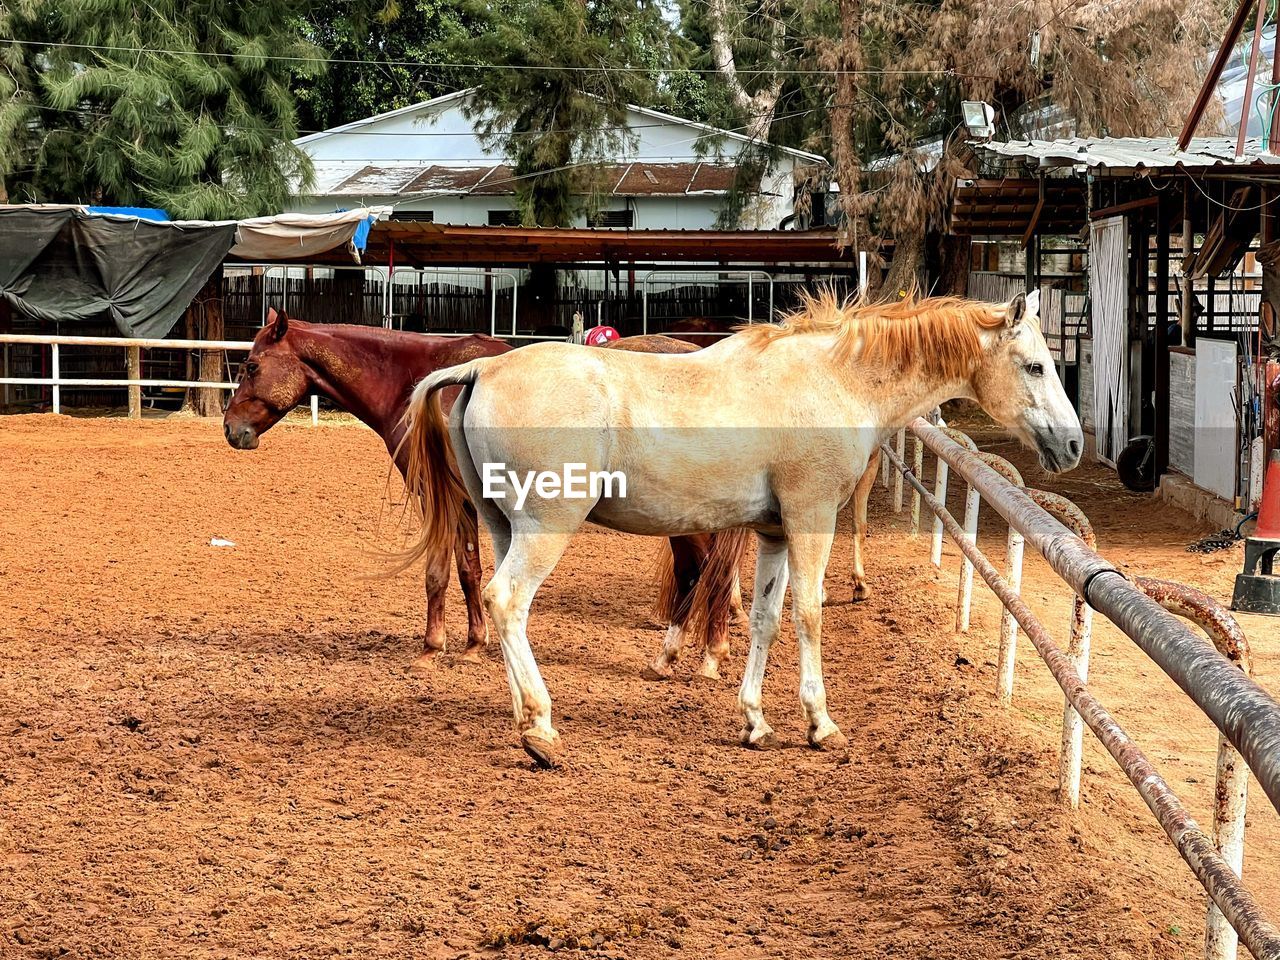 horse, mammal, animal, animal themes, domestic animals, livestock, pet, animal wildlife, mare, nature, pack animal, tree, day, built structure, architecture, group of animals, plant, building exterior, working animal, herbivorous, brown, stallion, outdoors, no people, standing, land, sunlight, agriculture